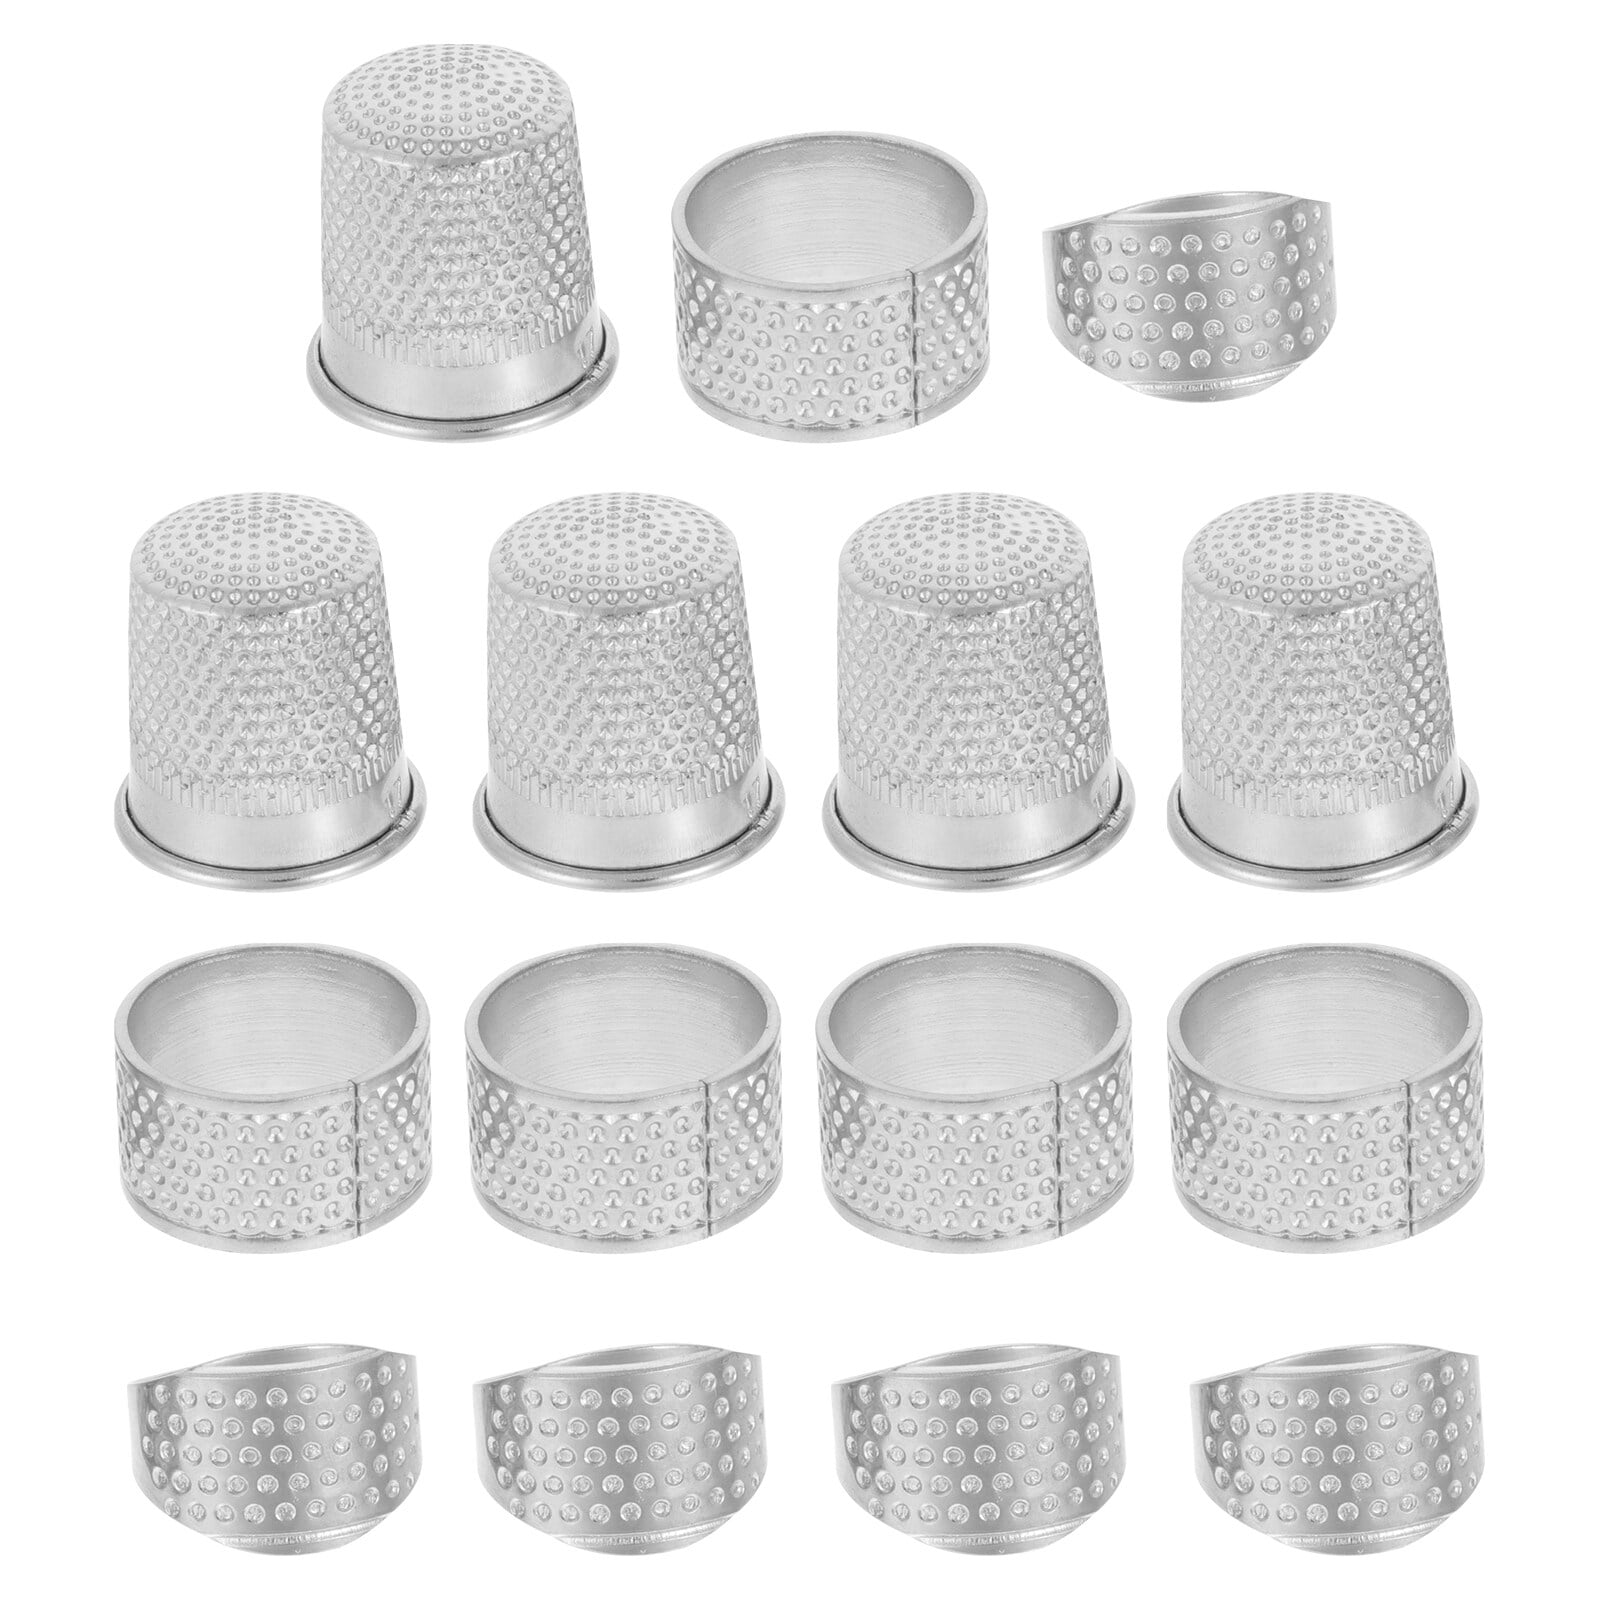  2Pcs Thimble Sleeve, Silicone Fingerstall Quilting Finger  Protector dedales costura Craft Accessories